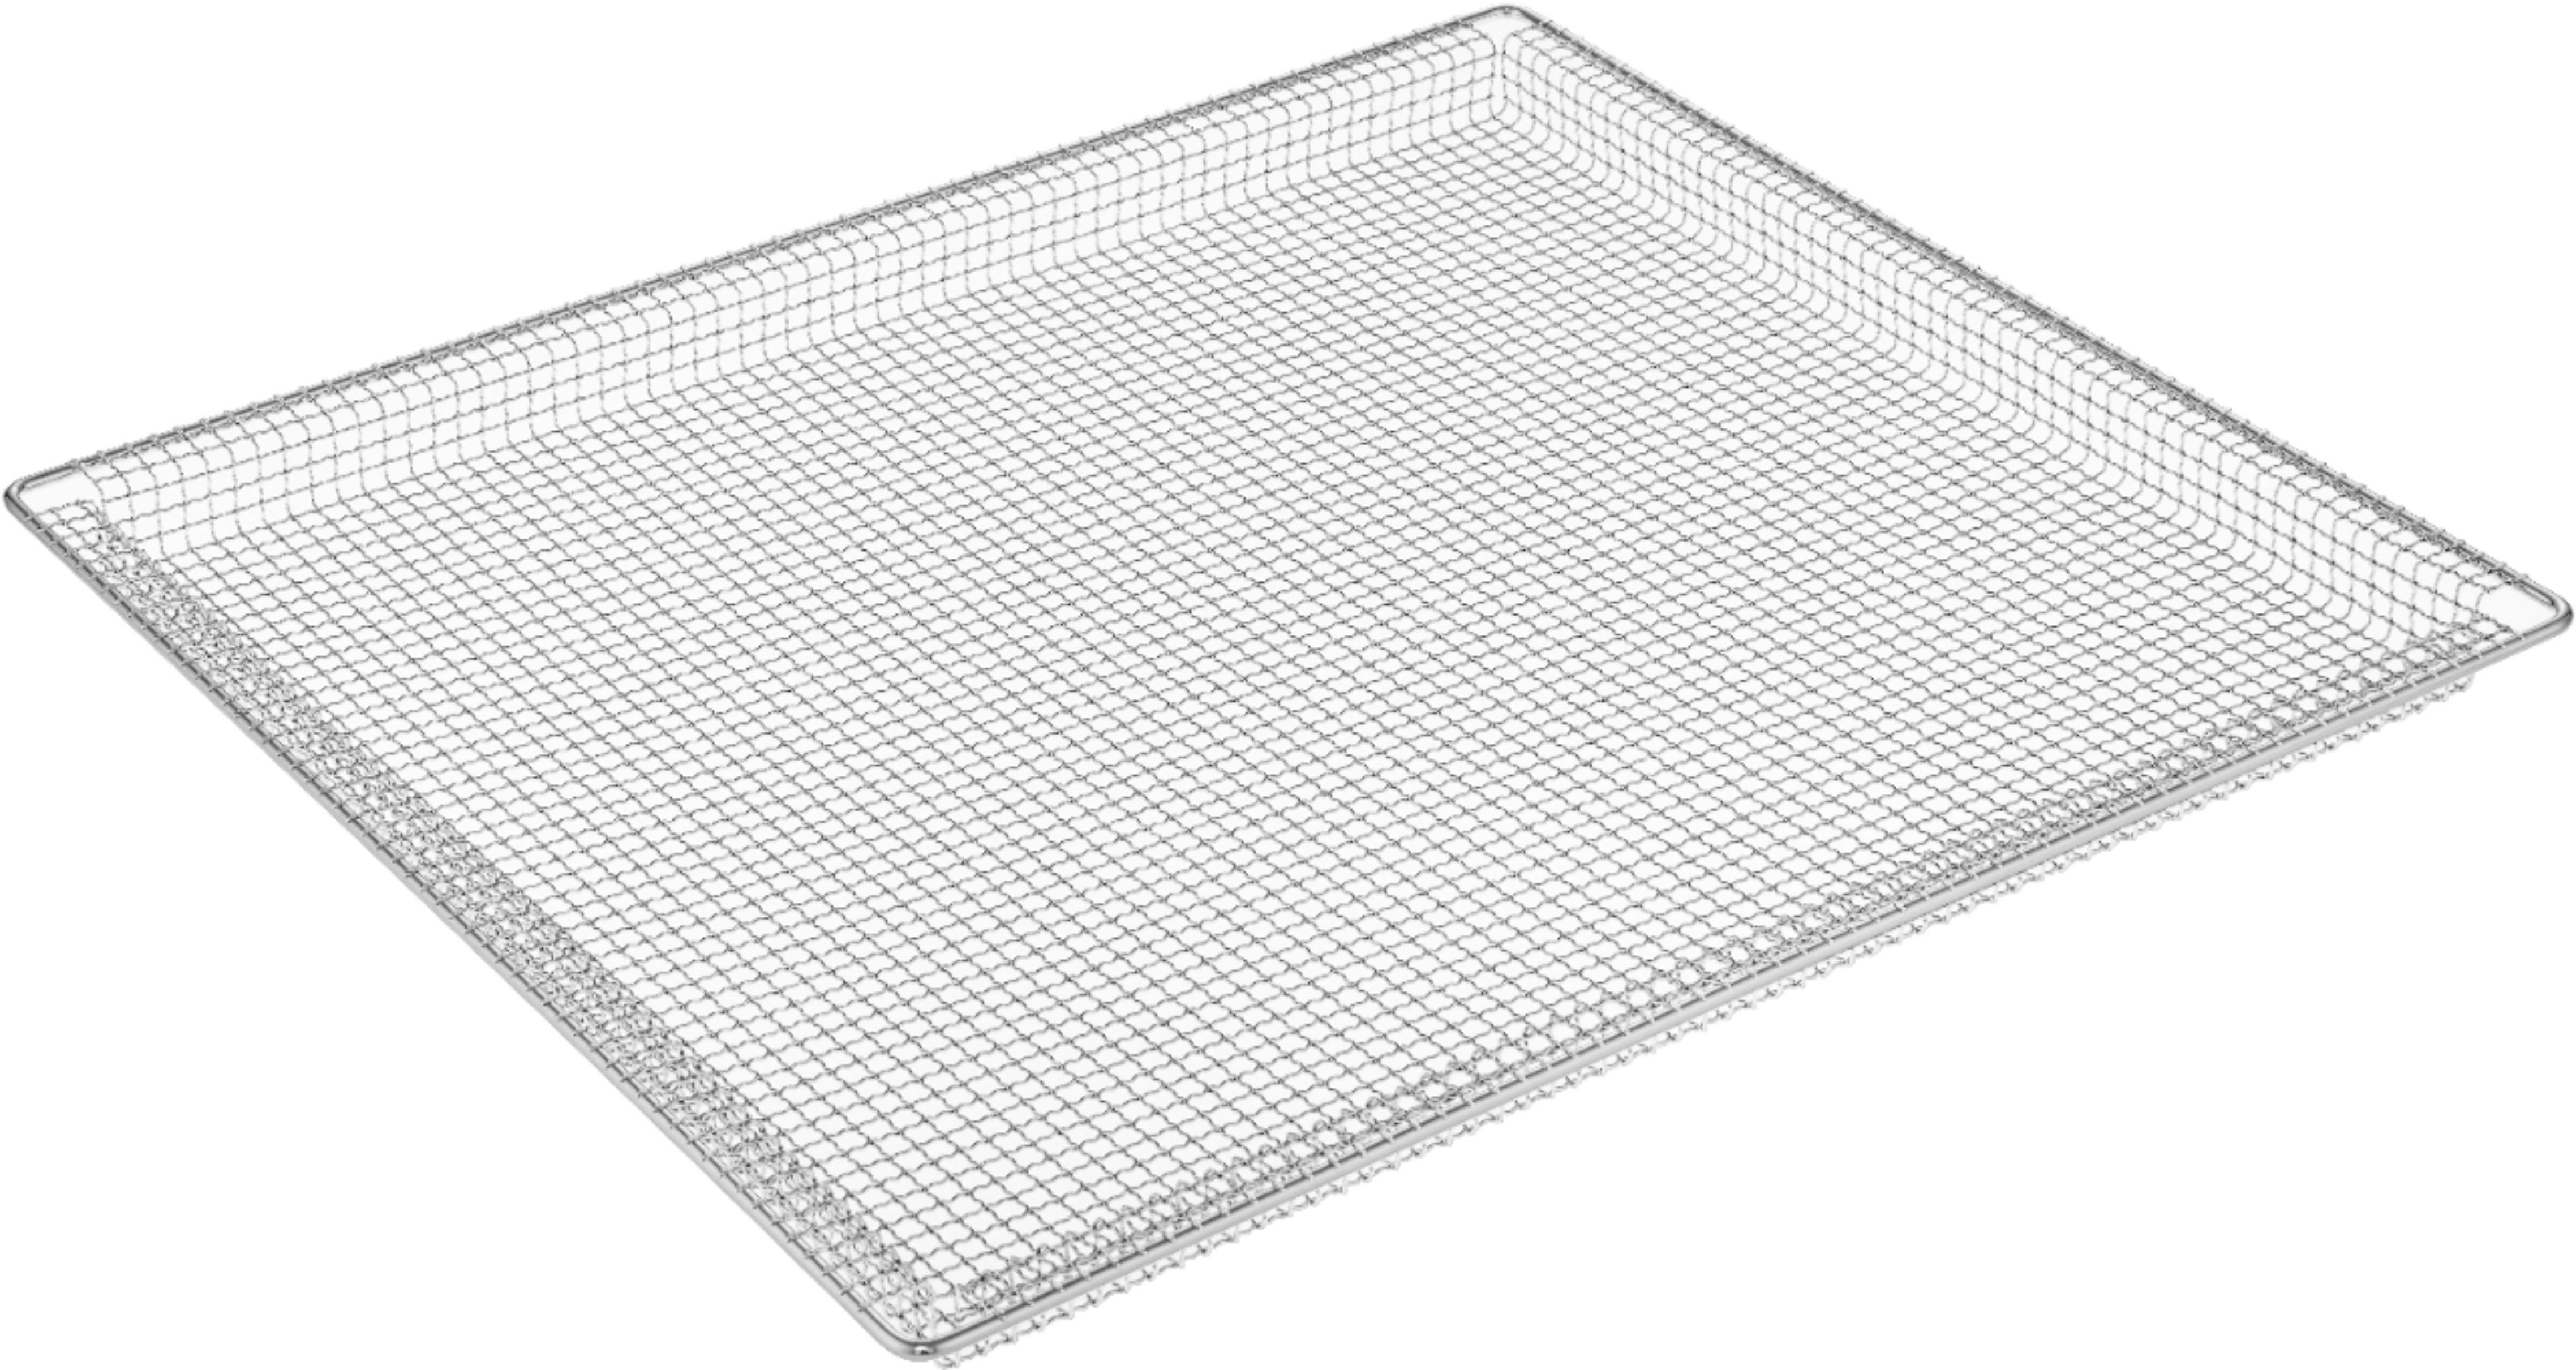 LG Air Fry Tray, Big Sandy Superstore